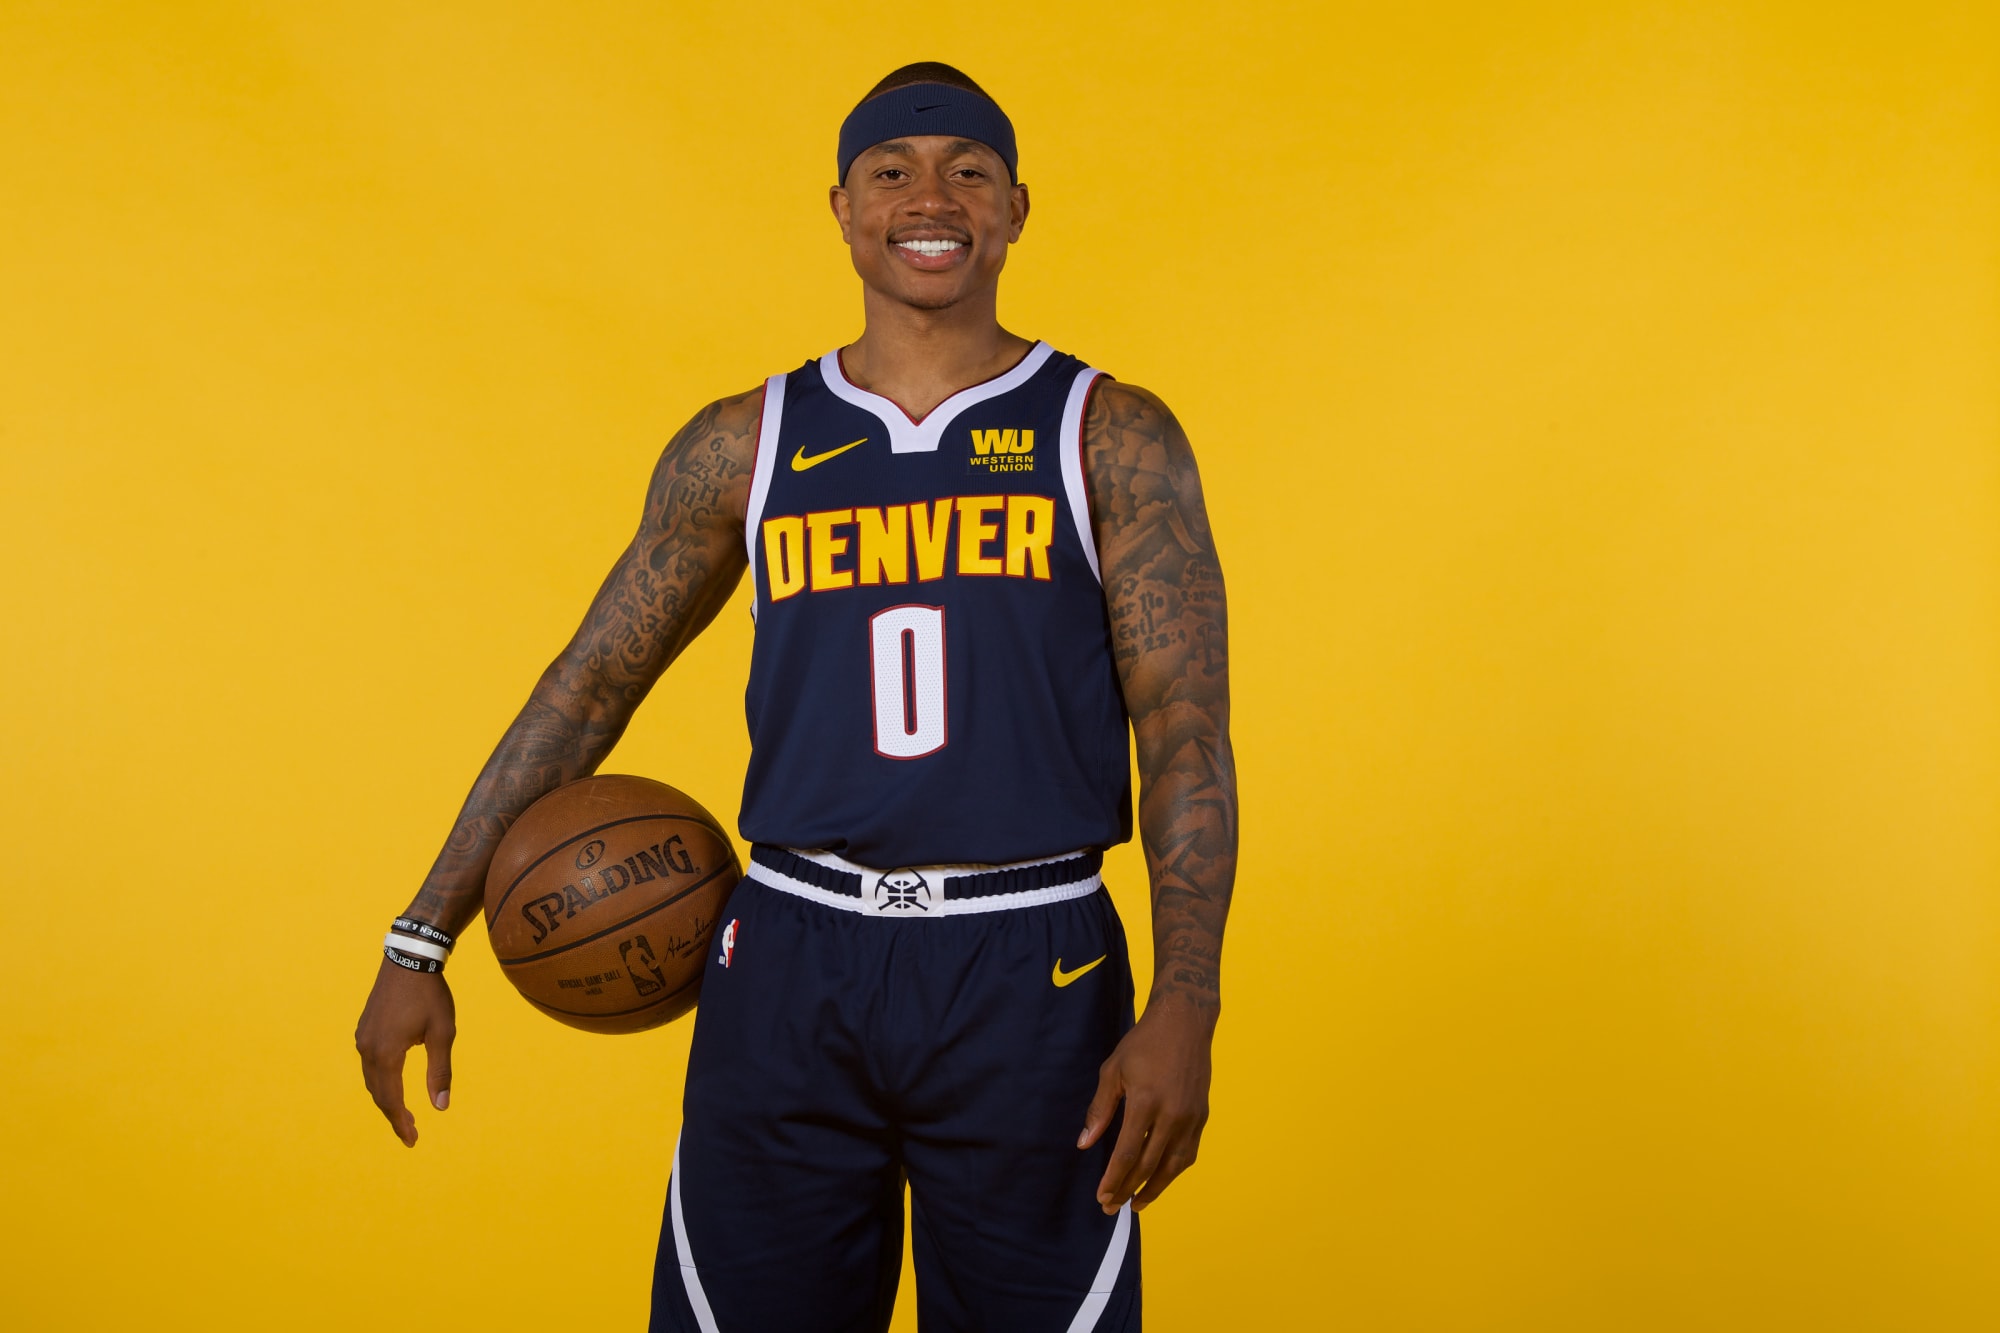 Isaiah Thomas is even shorter than his official height